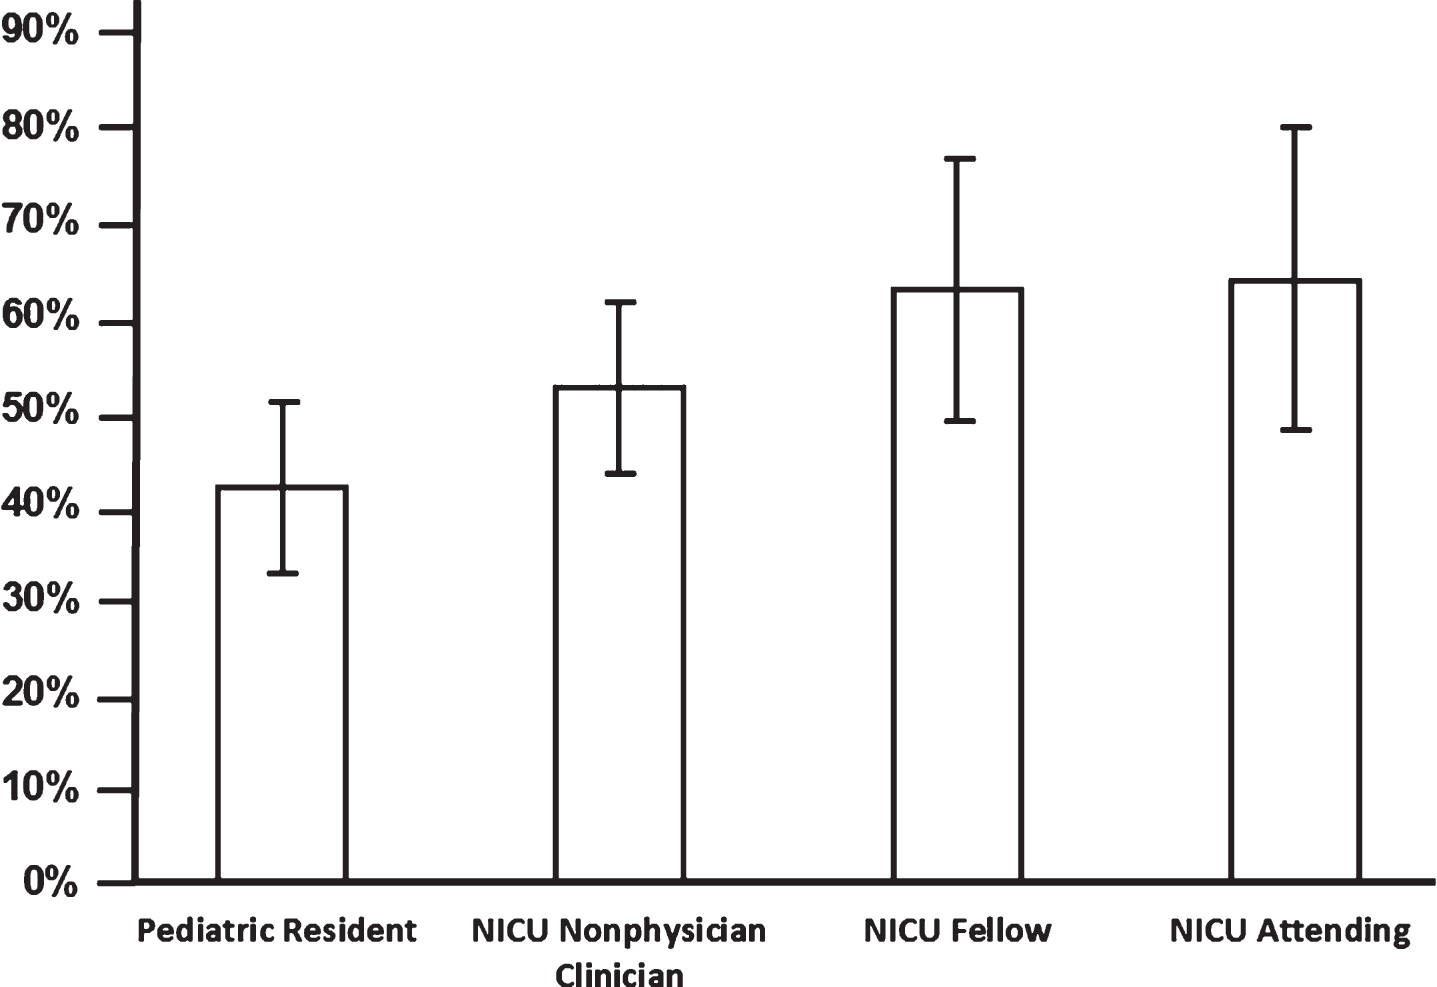 Neonatal intubation first attempt success rates, presented as mean±standard deviation, by provider type based on pooled data from eight published single center and multicenter observational studies (8,066 total intubations) [1–8]. First attempt success rates by provider type are as follows: pediatric residents 42±9%, NICU non-physician clinicians (nurse practitioners, physician assistants, respiratory therapists and transport nurses) 52±9%, NICU fellow 63±14%, NICU attending 64±16%. The overall first attempt intubation success was 50±8%.